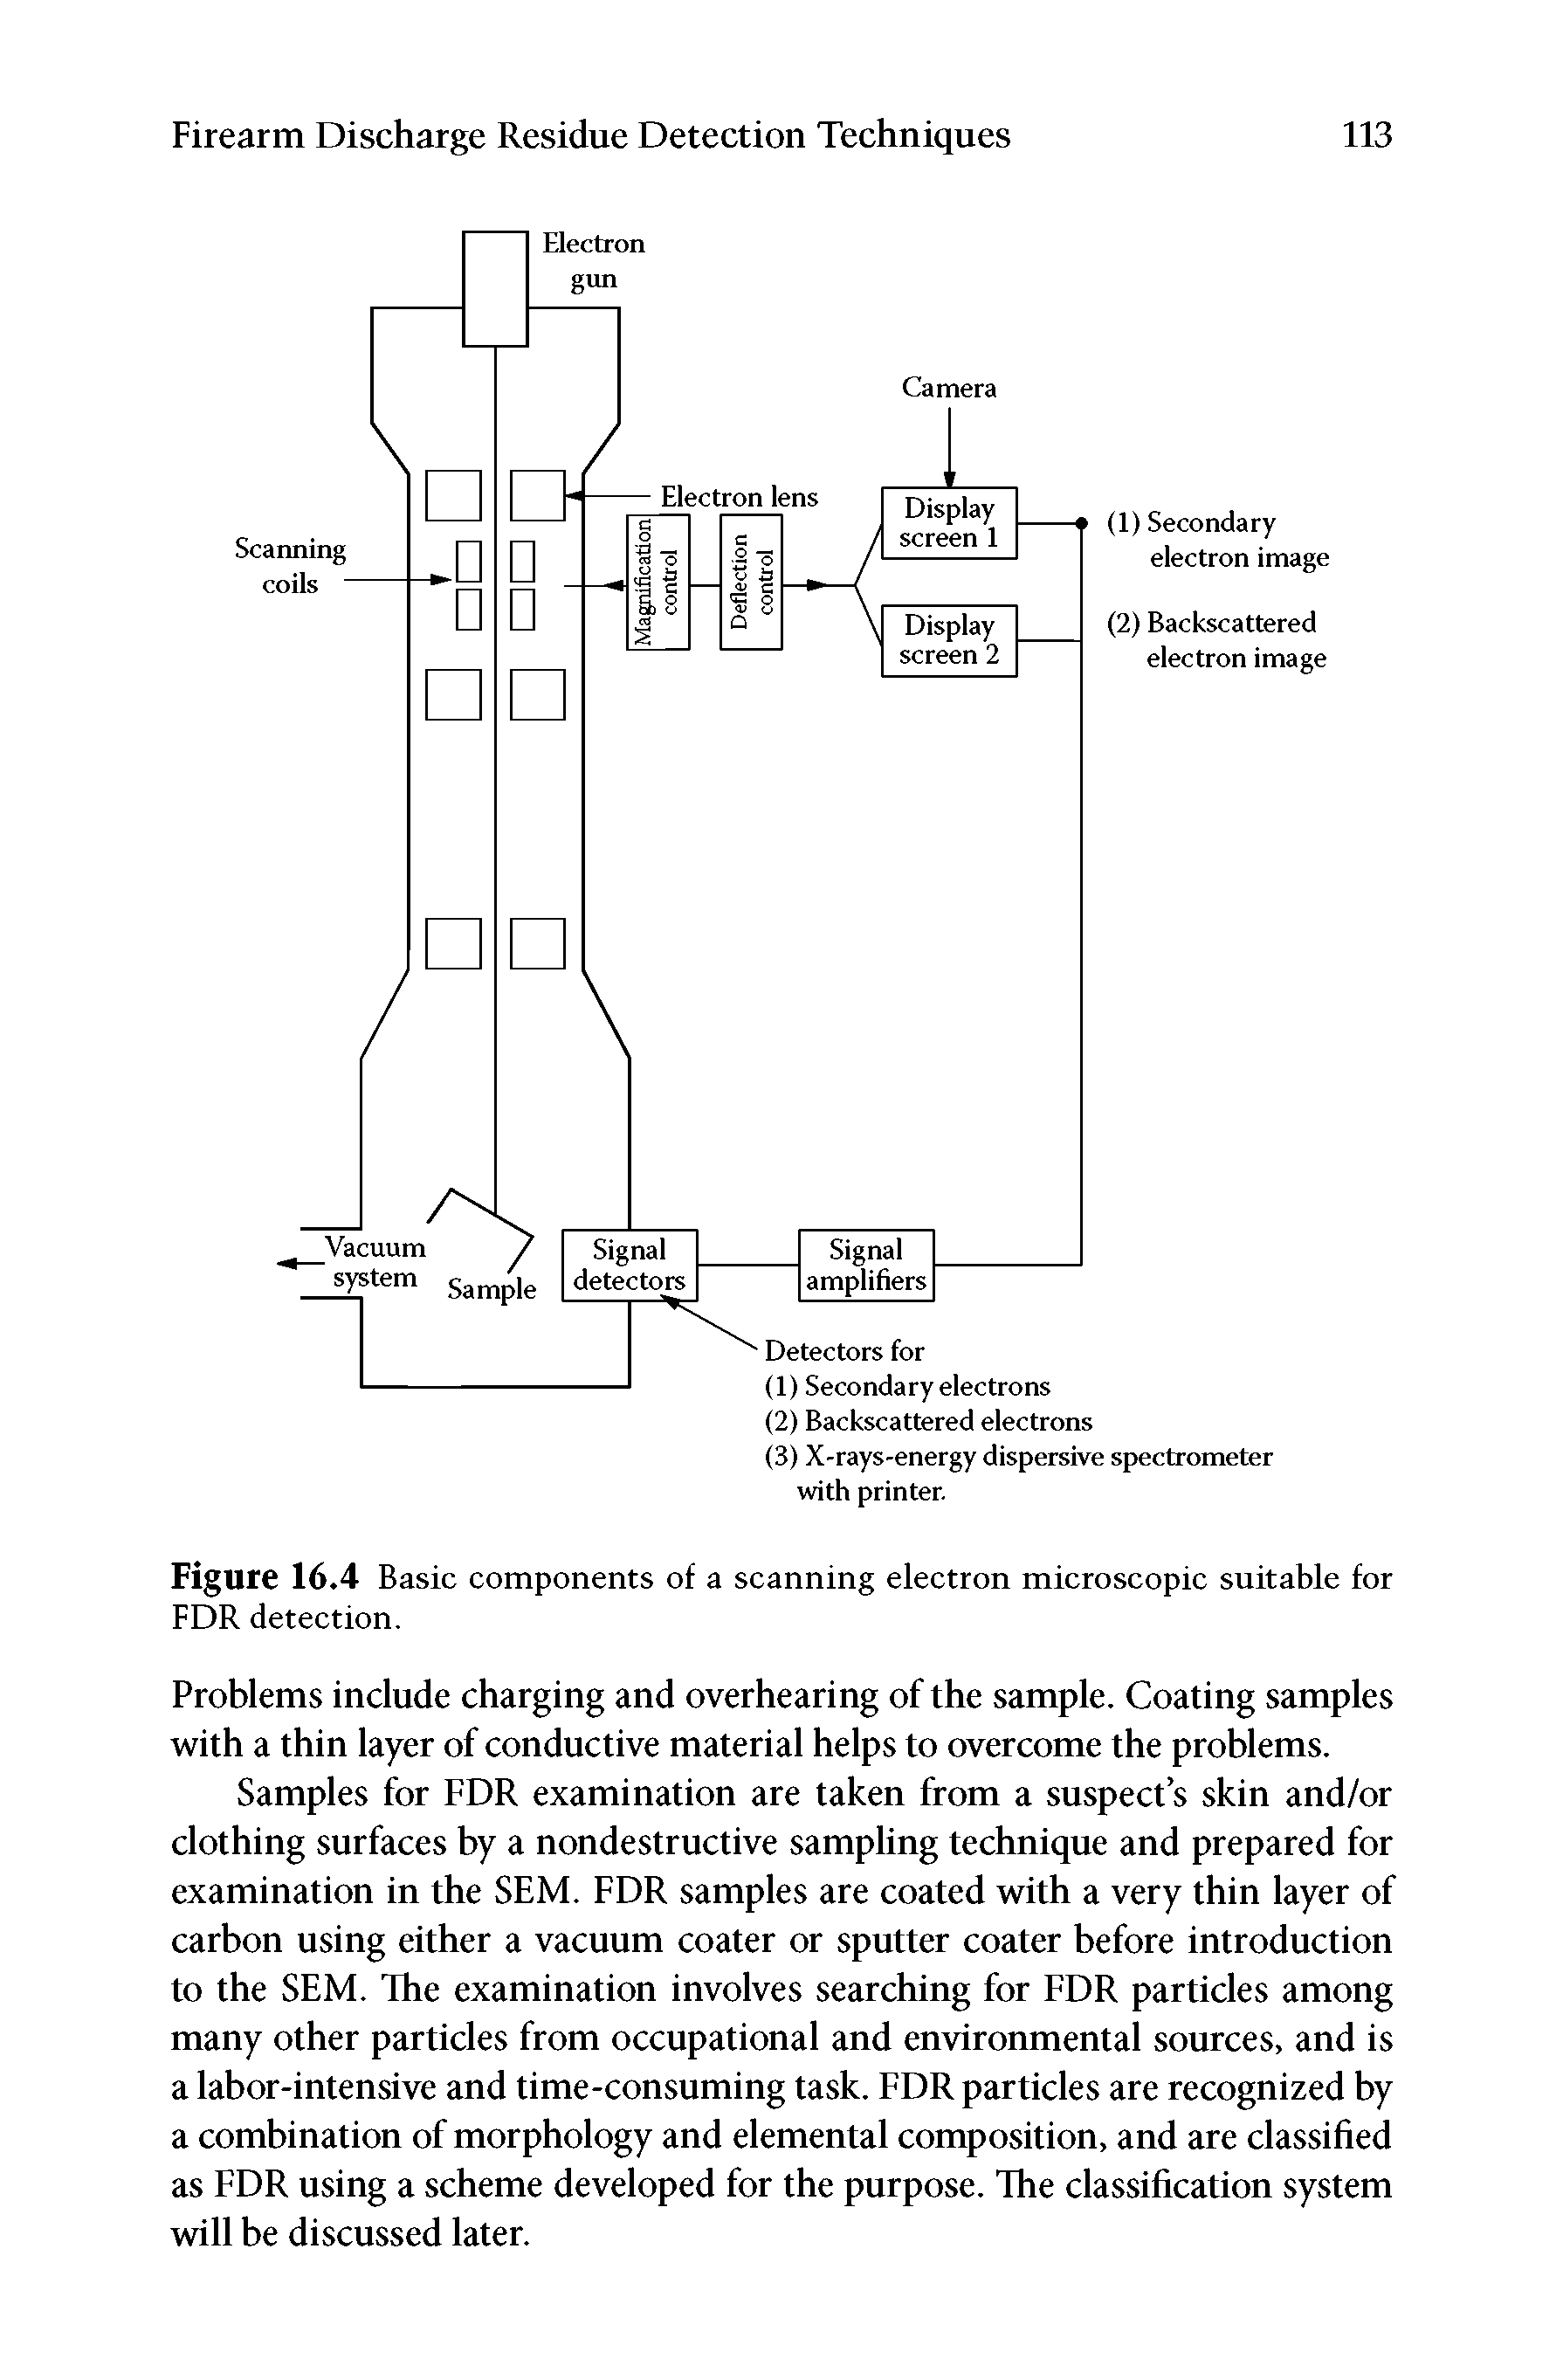 Figure 16.4 Basic components of a scanning electron microscopic suitable for FDR detection.